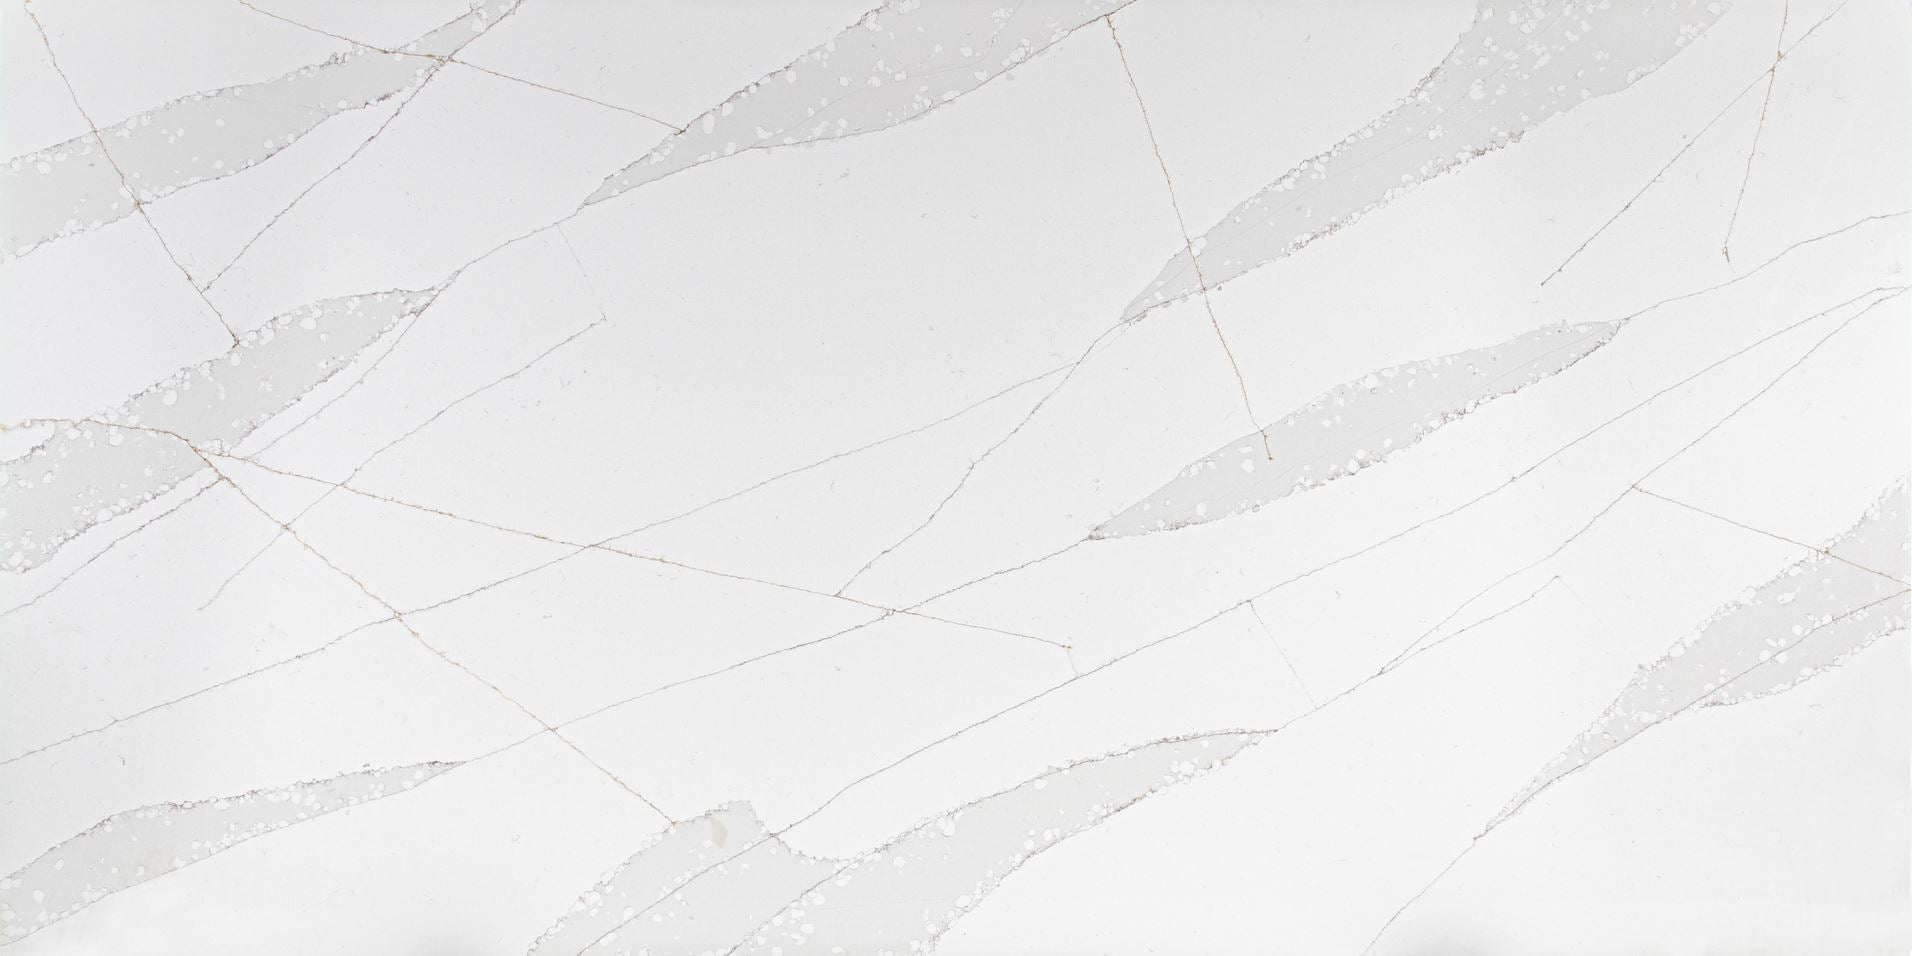 Calacatta Hazel quartz slab with thick veining combined with interlaced thinner veins on a white background.